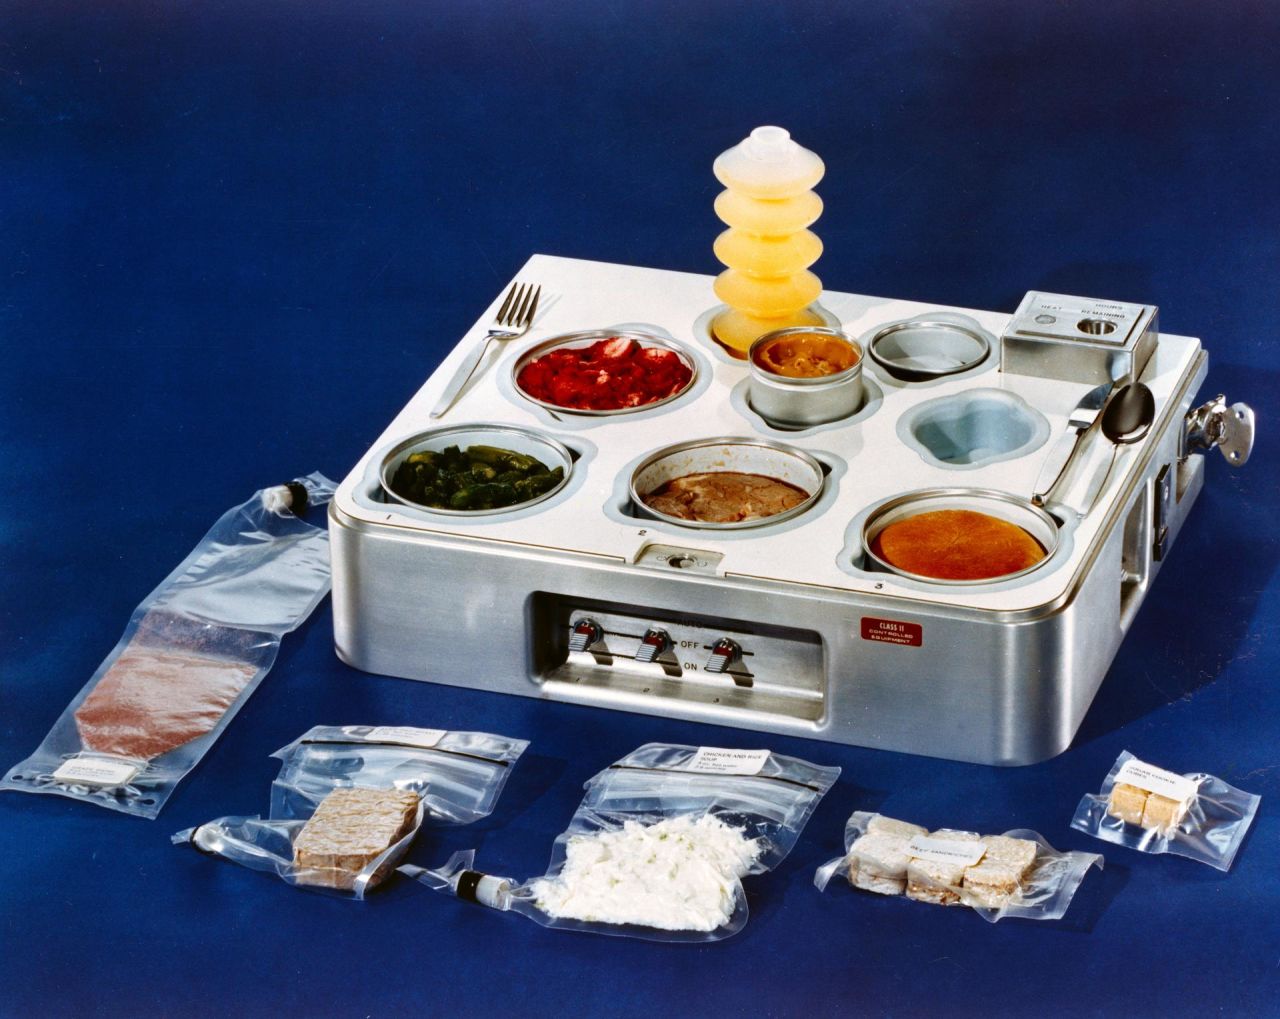 This food tray was used in the now-defunct Skylab, the first US space station launched by NASA in 1973. Shown in the tray are (counterclockwise from back): orange drink, strawberries, asparagus, prime rib, dinner roll and  butterscotch pudding.